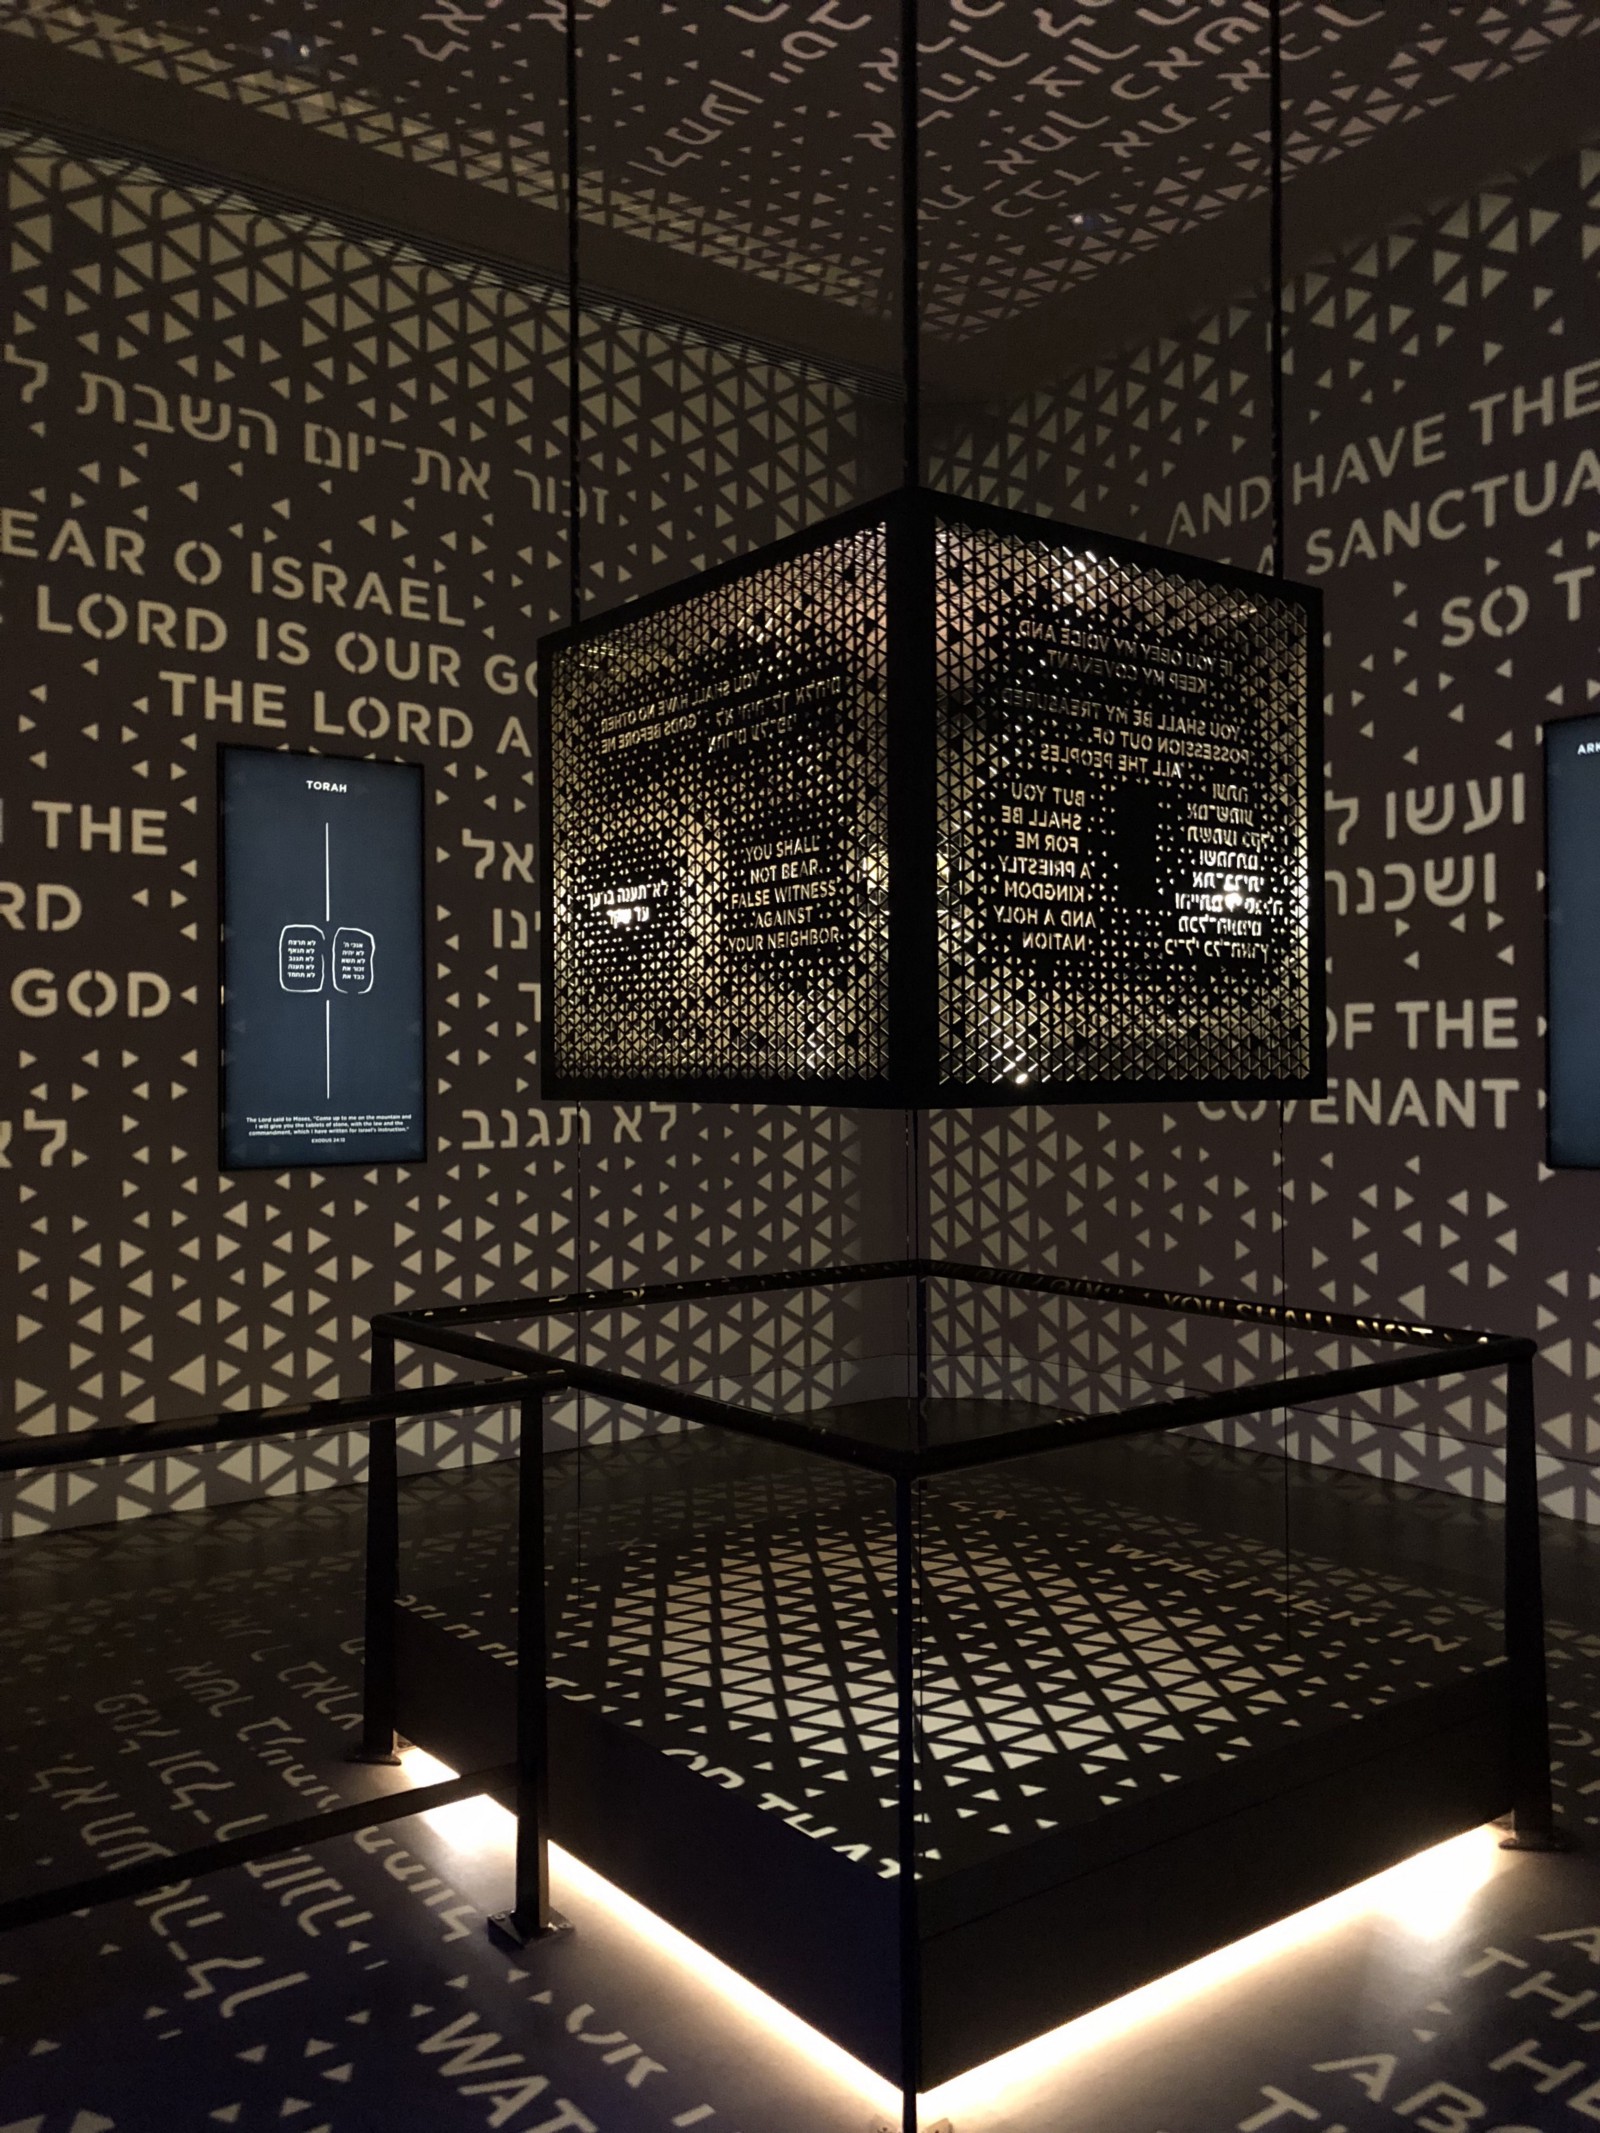 Did the New Bible Museum Copy This Muslim Artist’s Award-Winning Work? It Depends On Who You Ask.